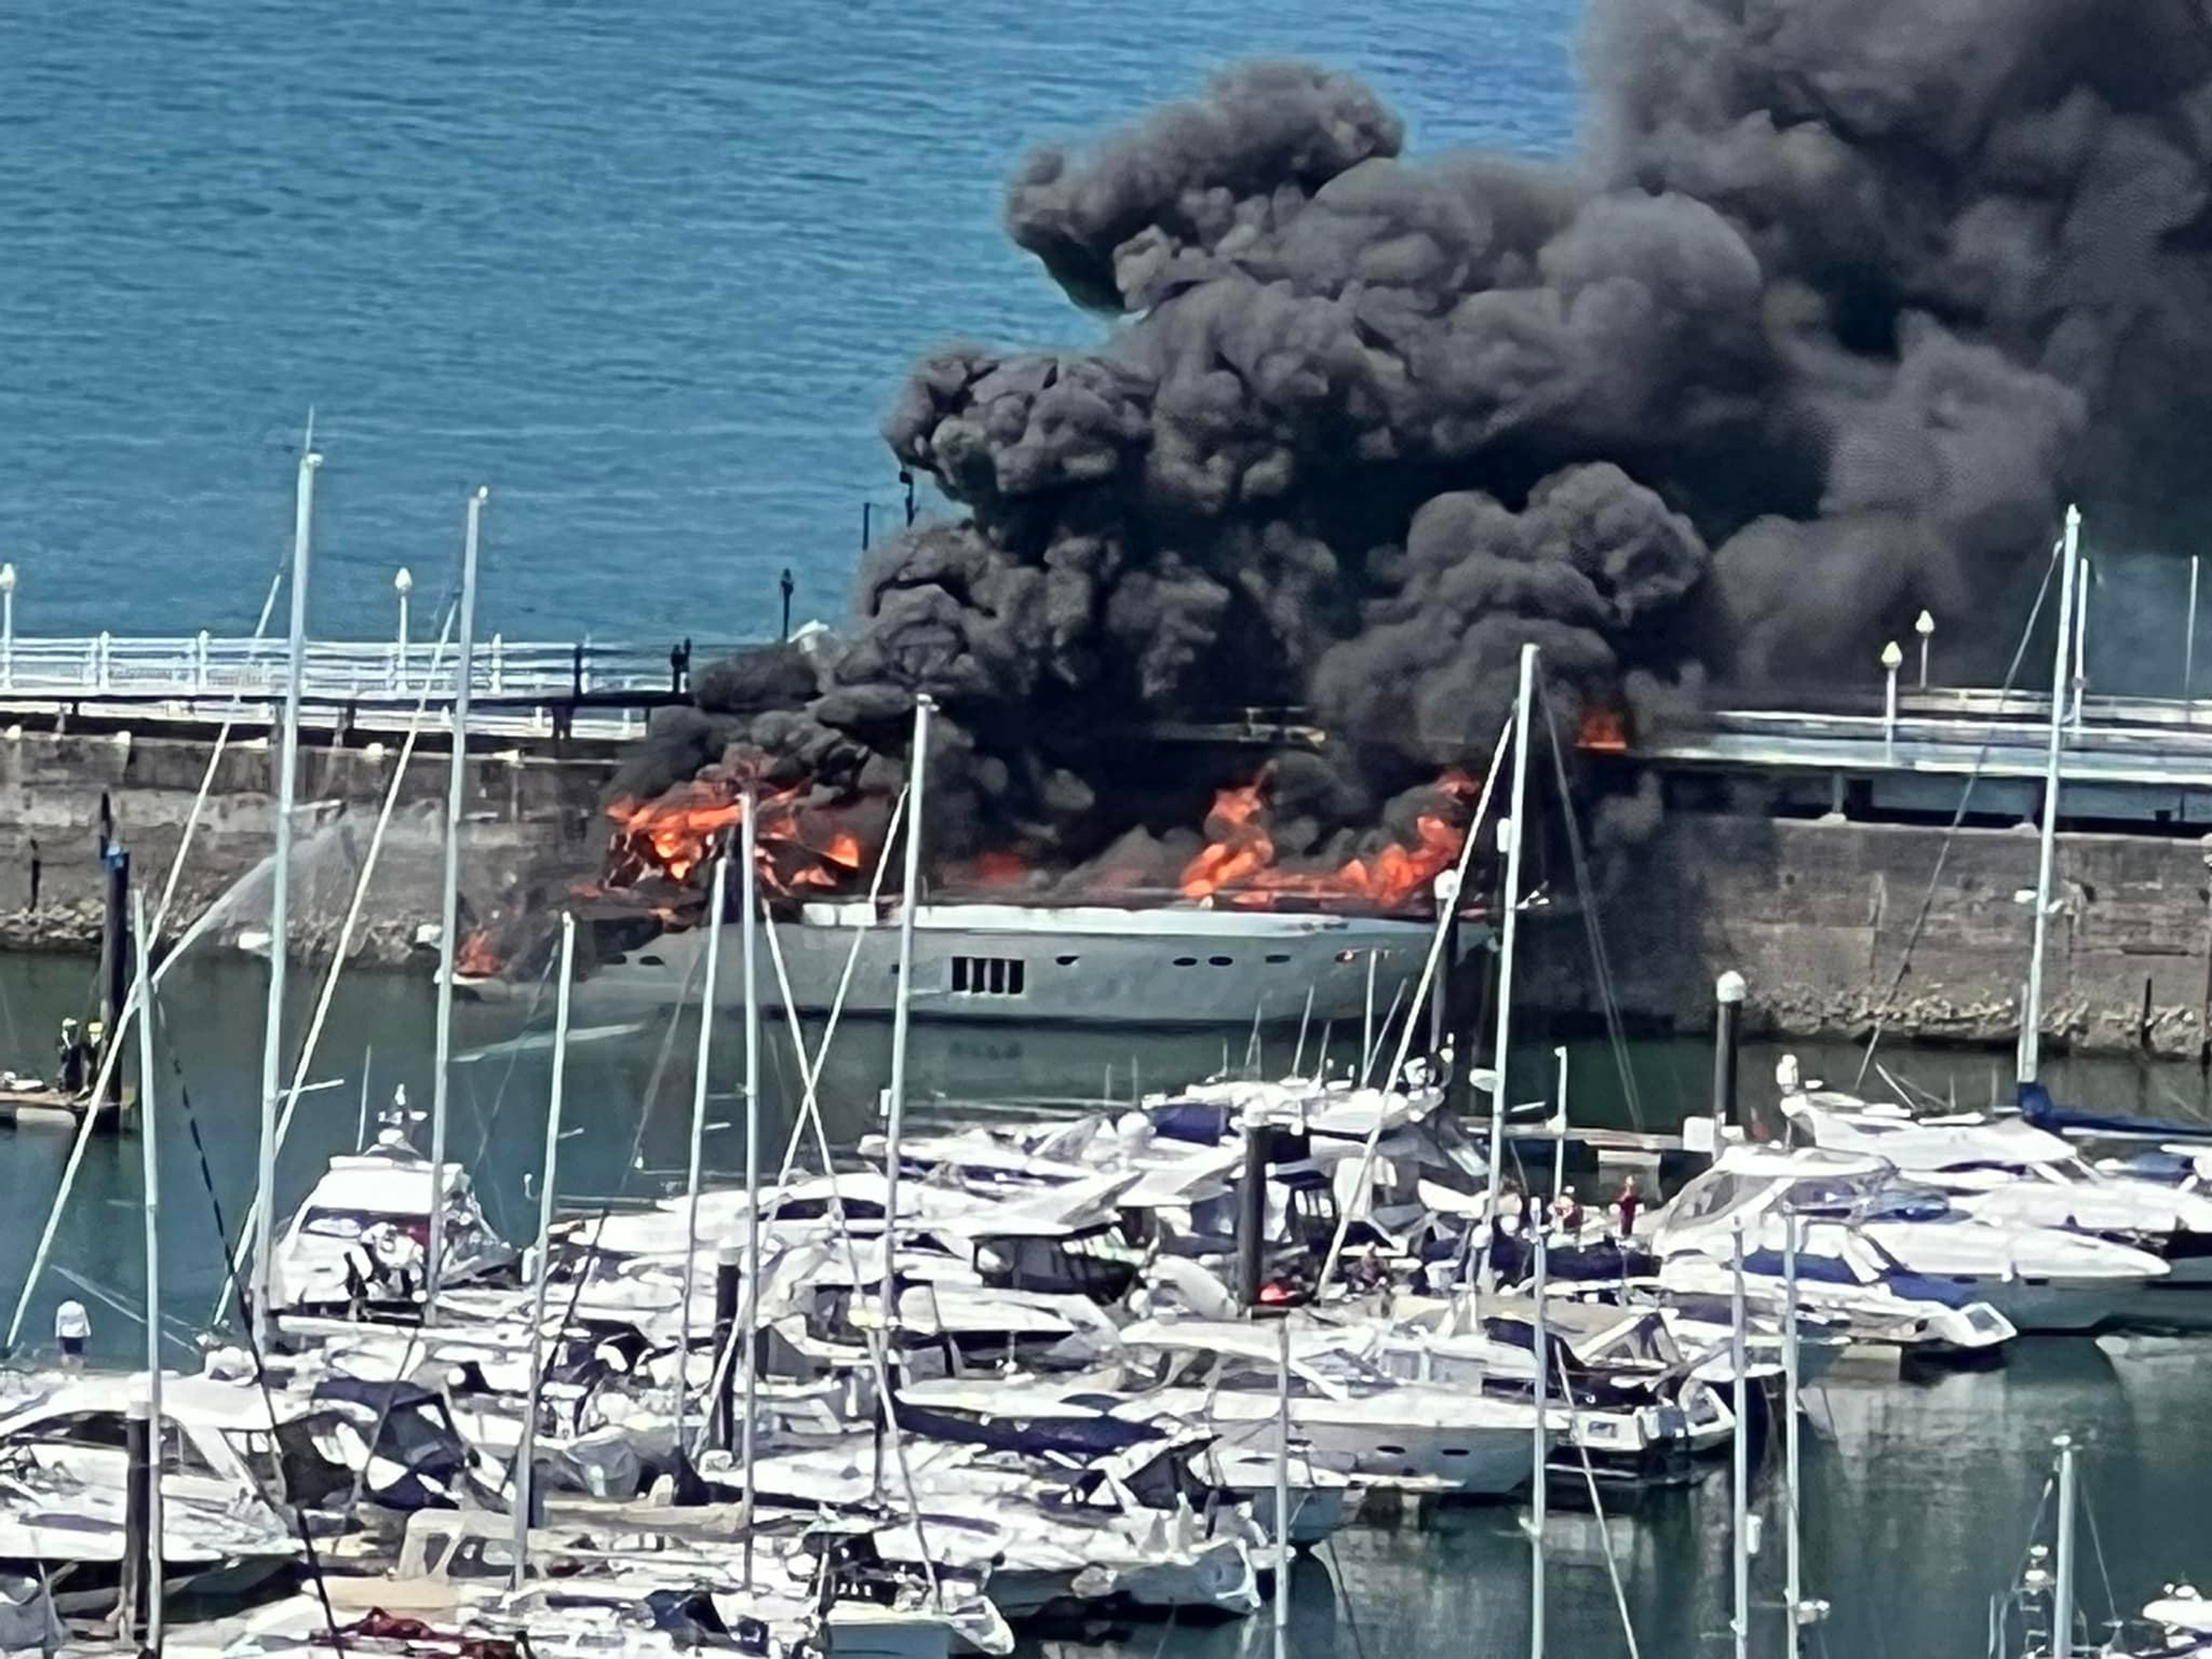 £6m Superyacht carrying 8,000 litres of fuel sinks after going up in flames at British marina